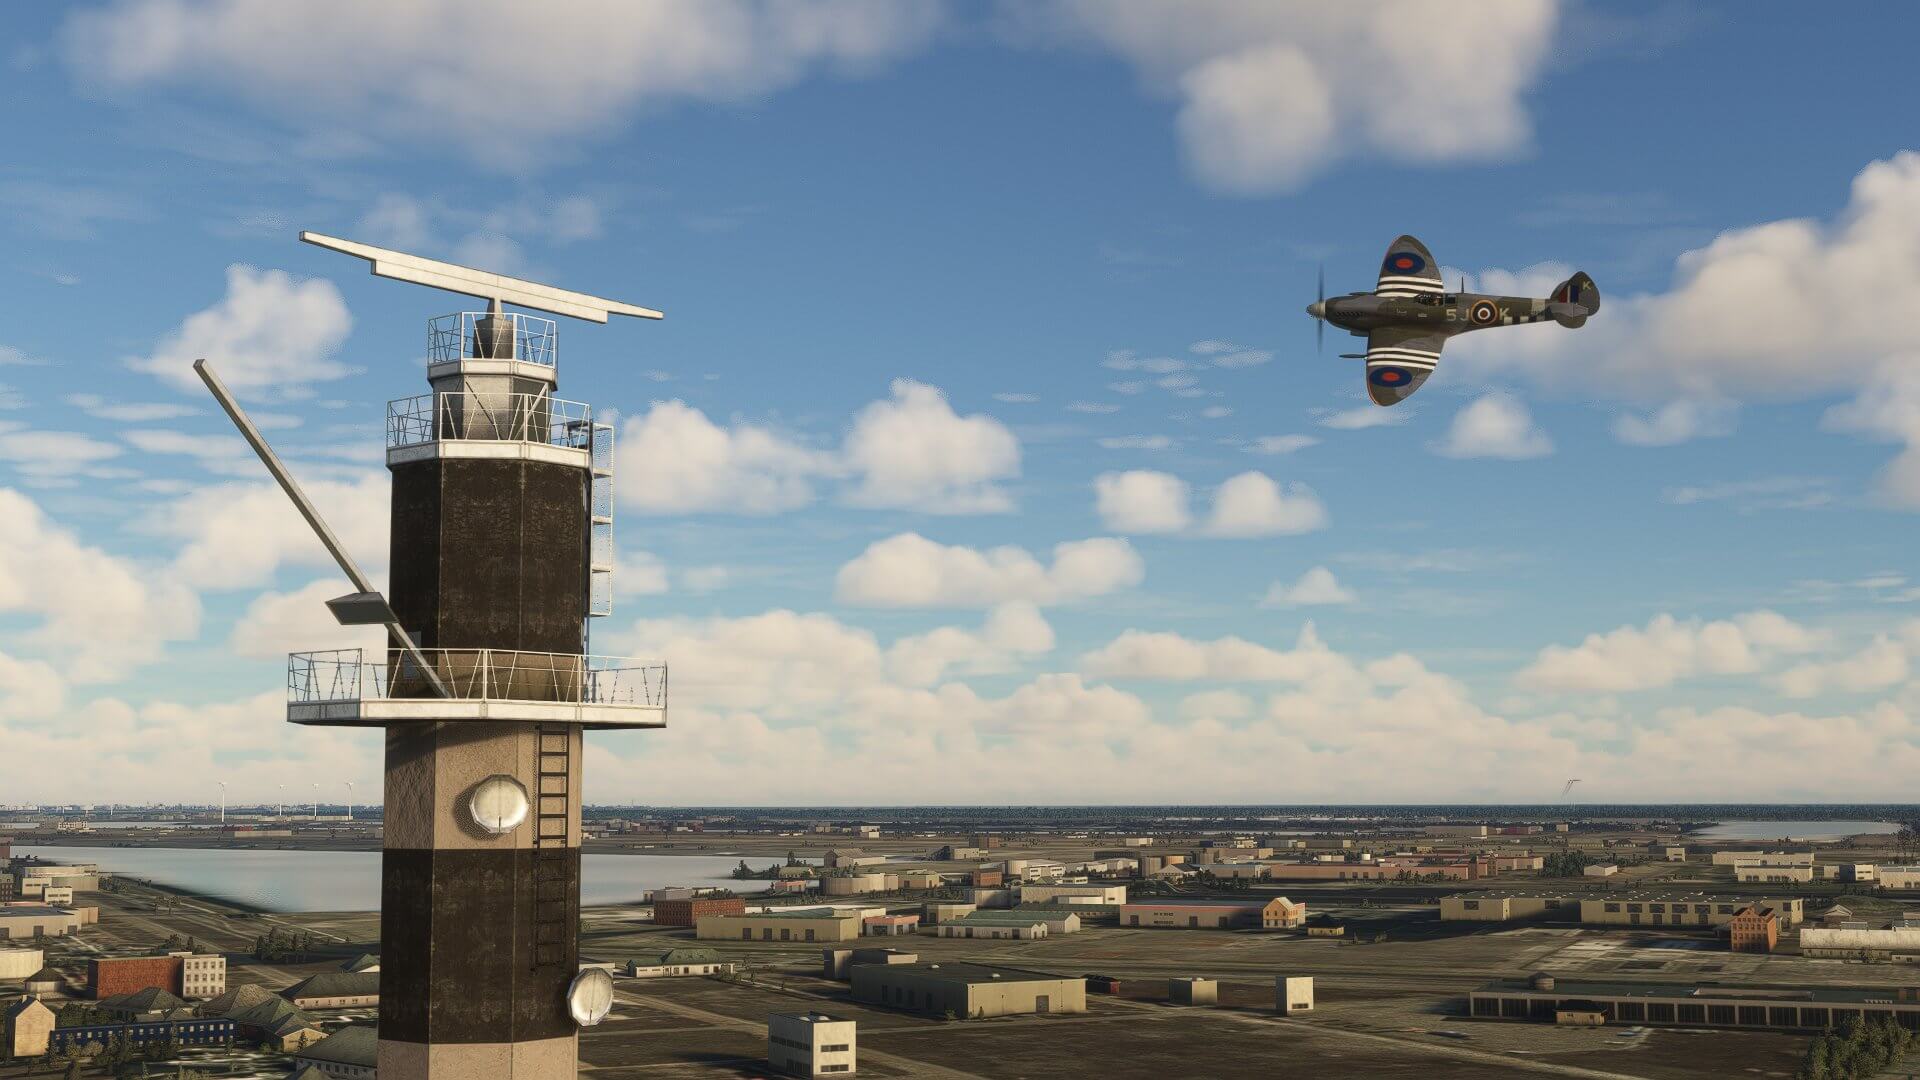 A Spitfire banks left passing over a radio tower